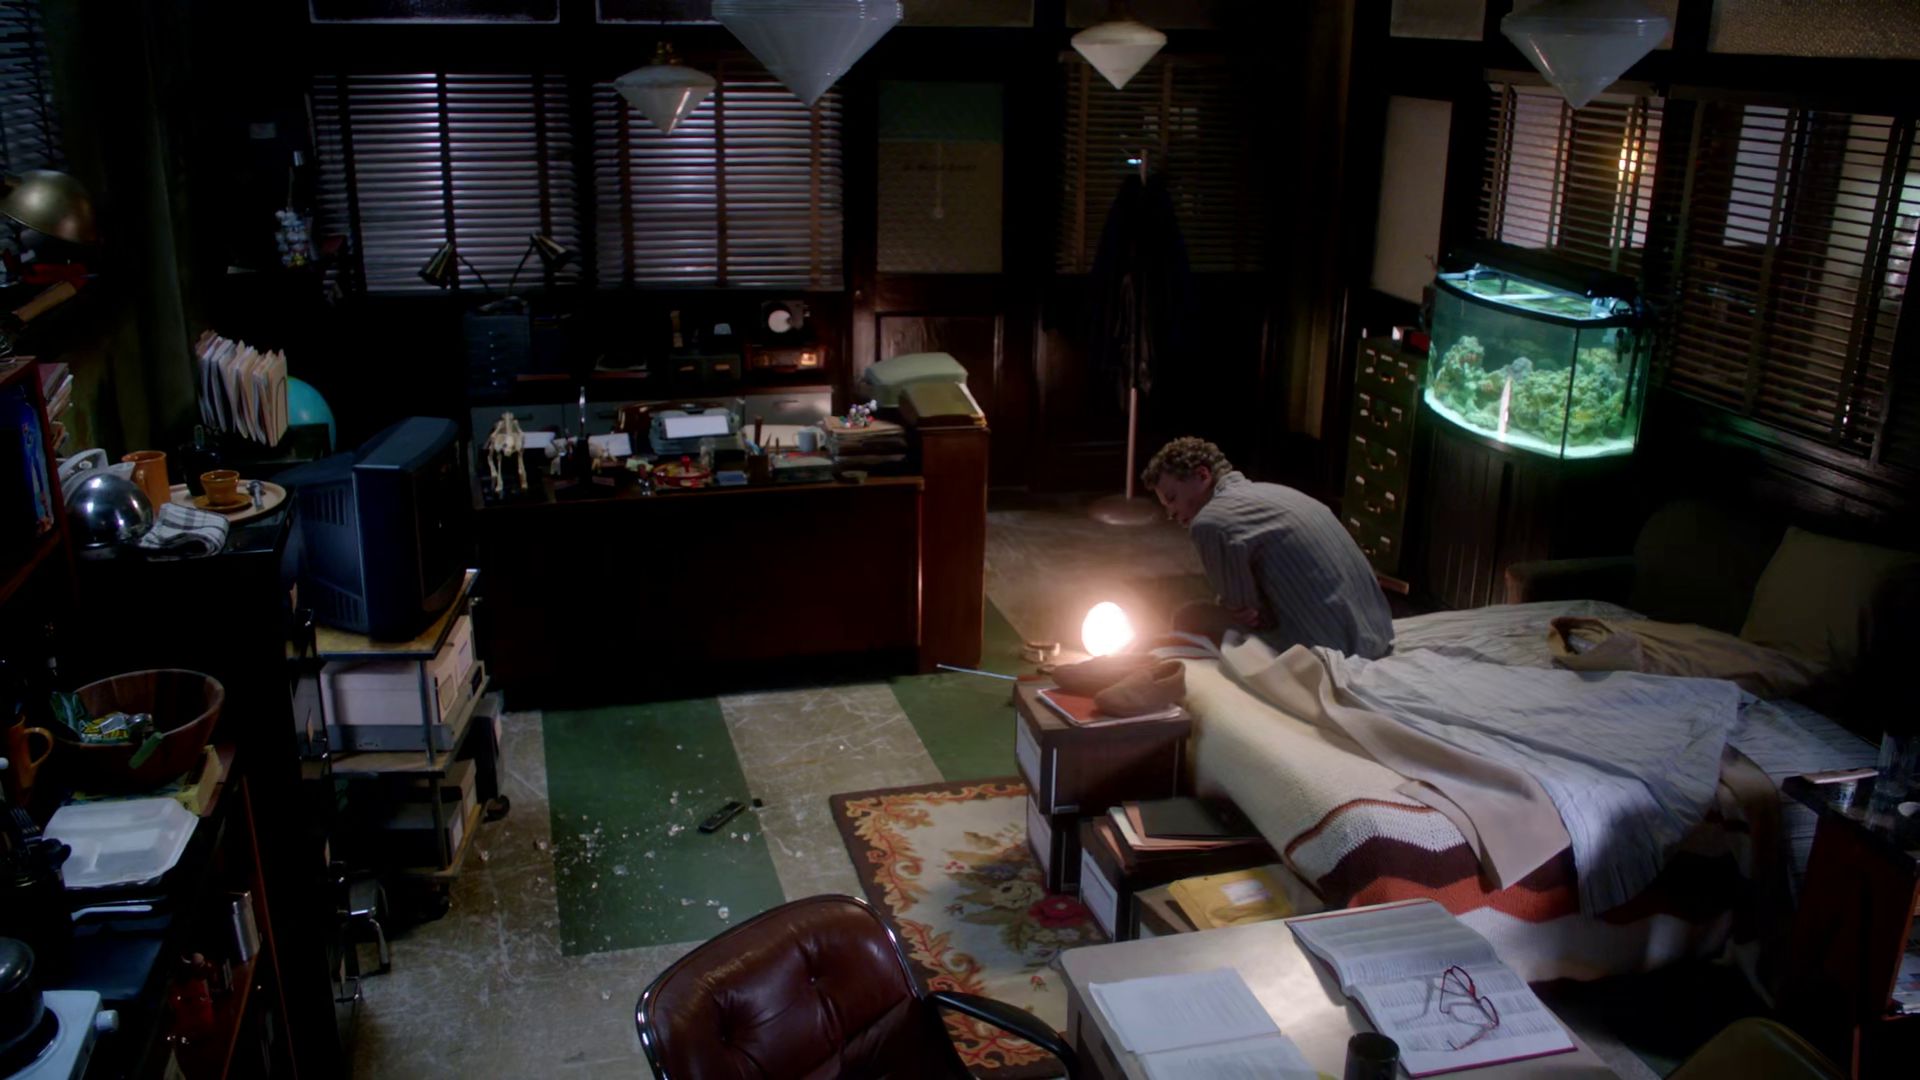 timelinewithoutpeter: Walter's room in the lab